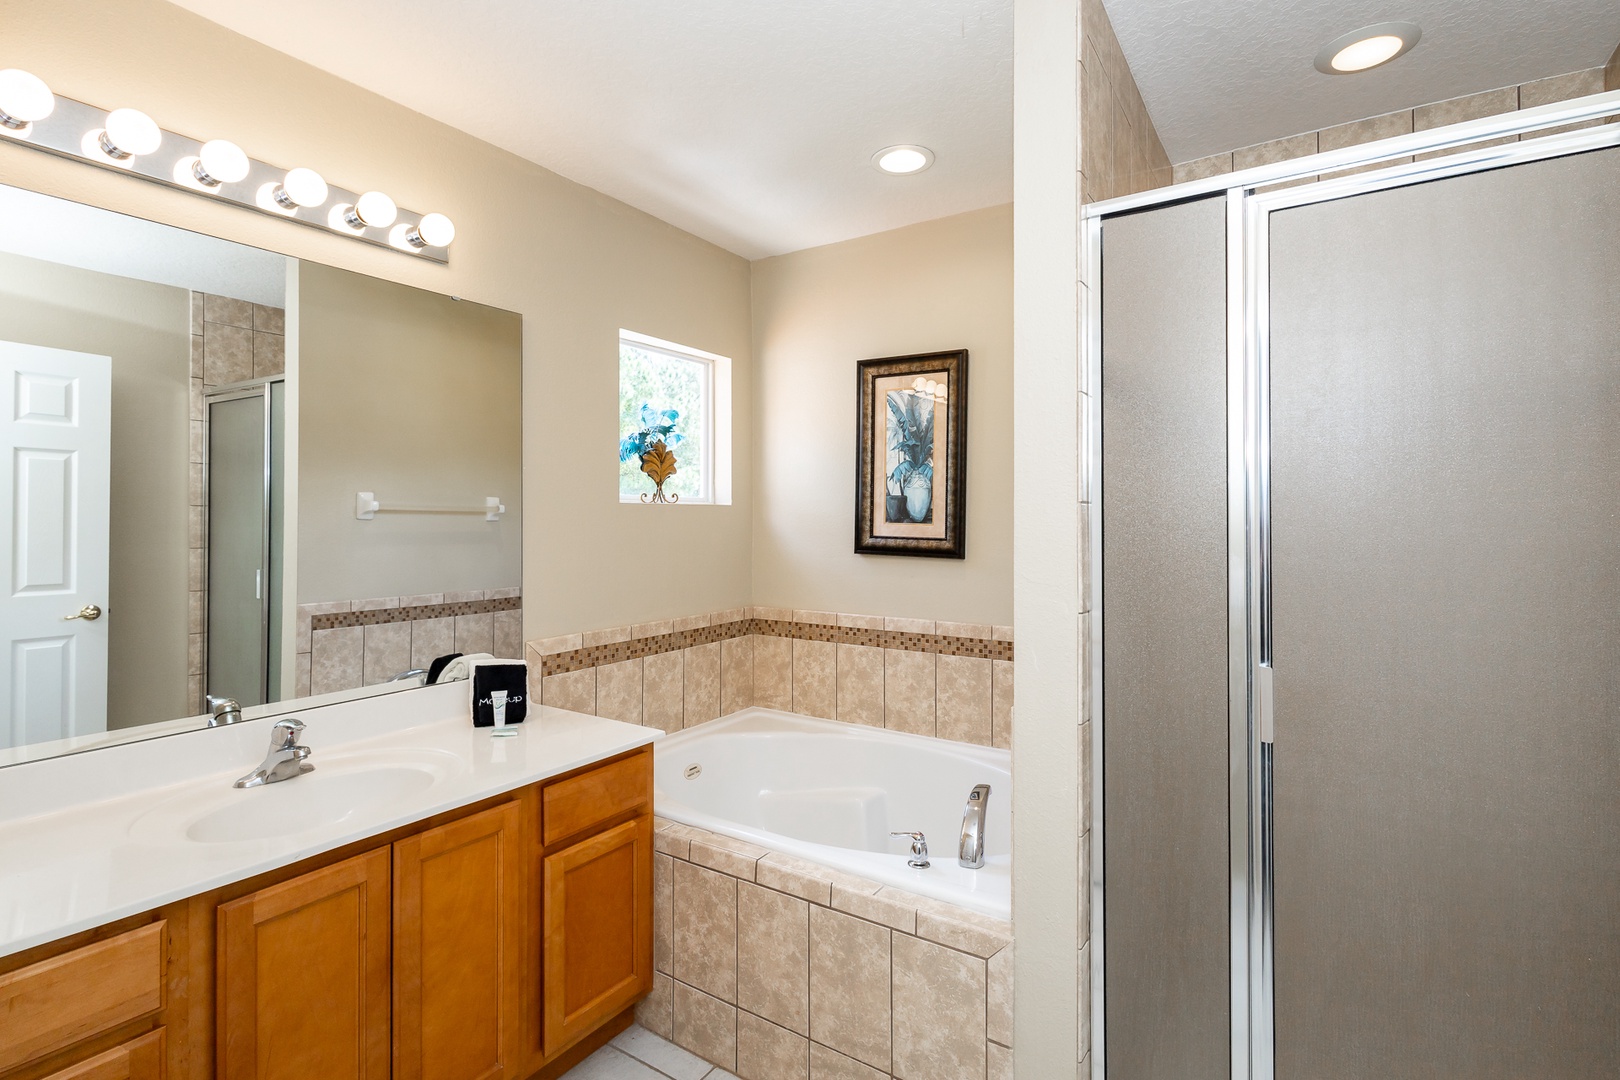 This queen en suite offers an oversized vanity, glass shower, & soaking tub